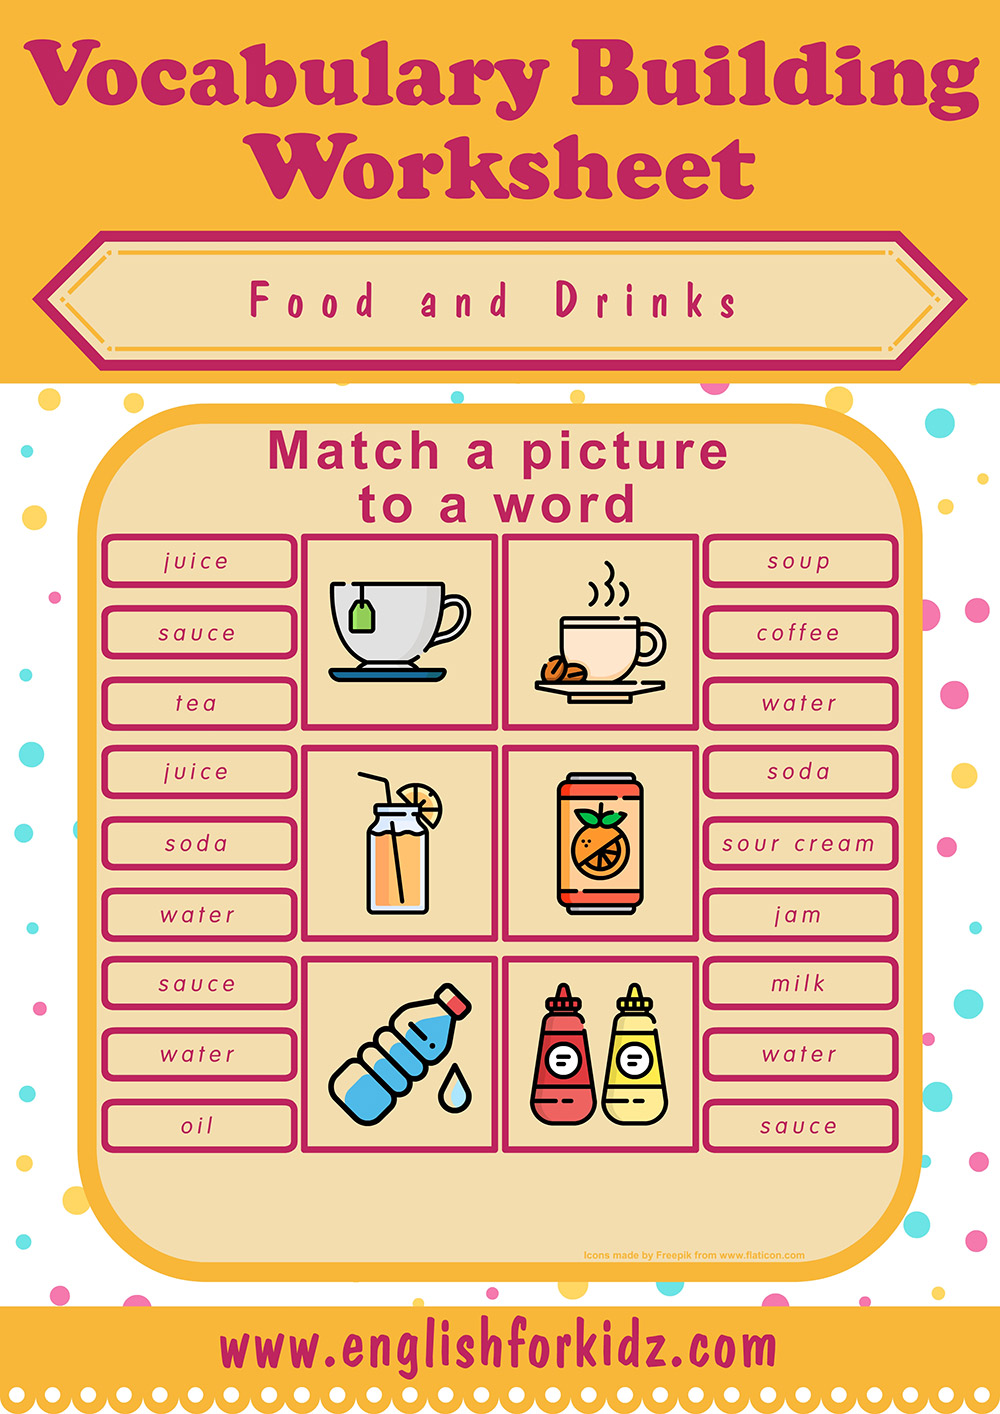 english-for-kids-step-by-step-food-drinks-worksheets-picture-to-word-matching